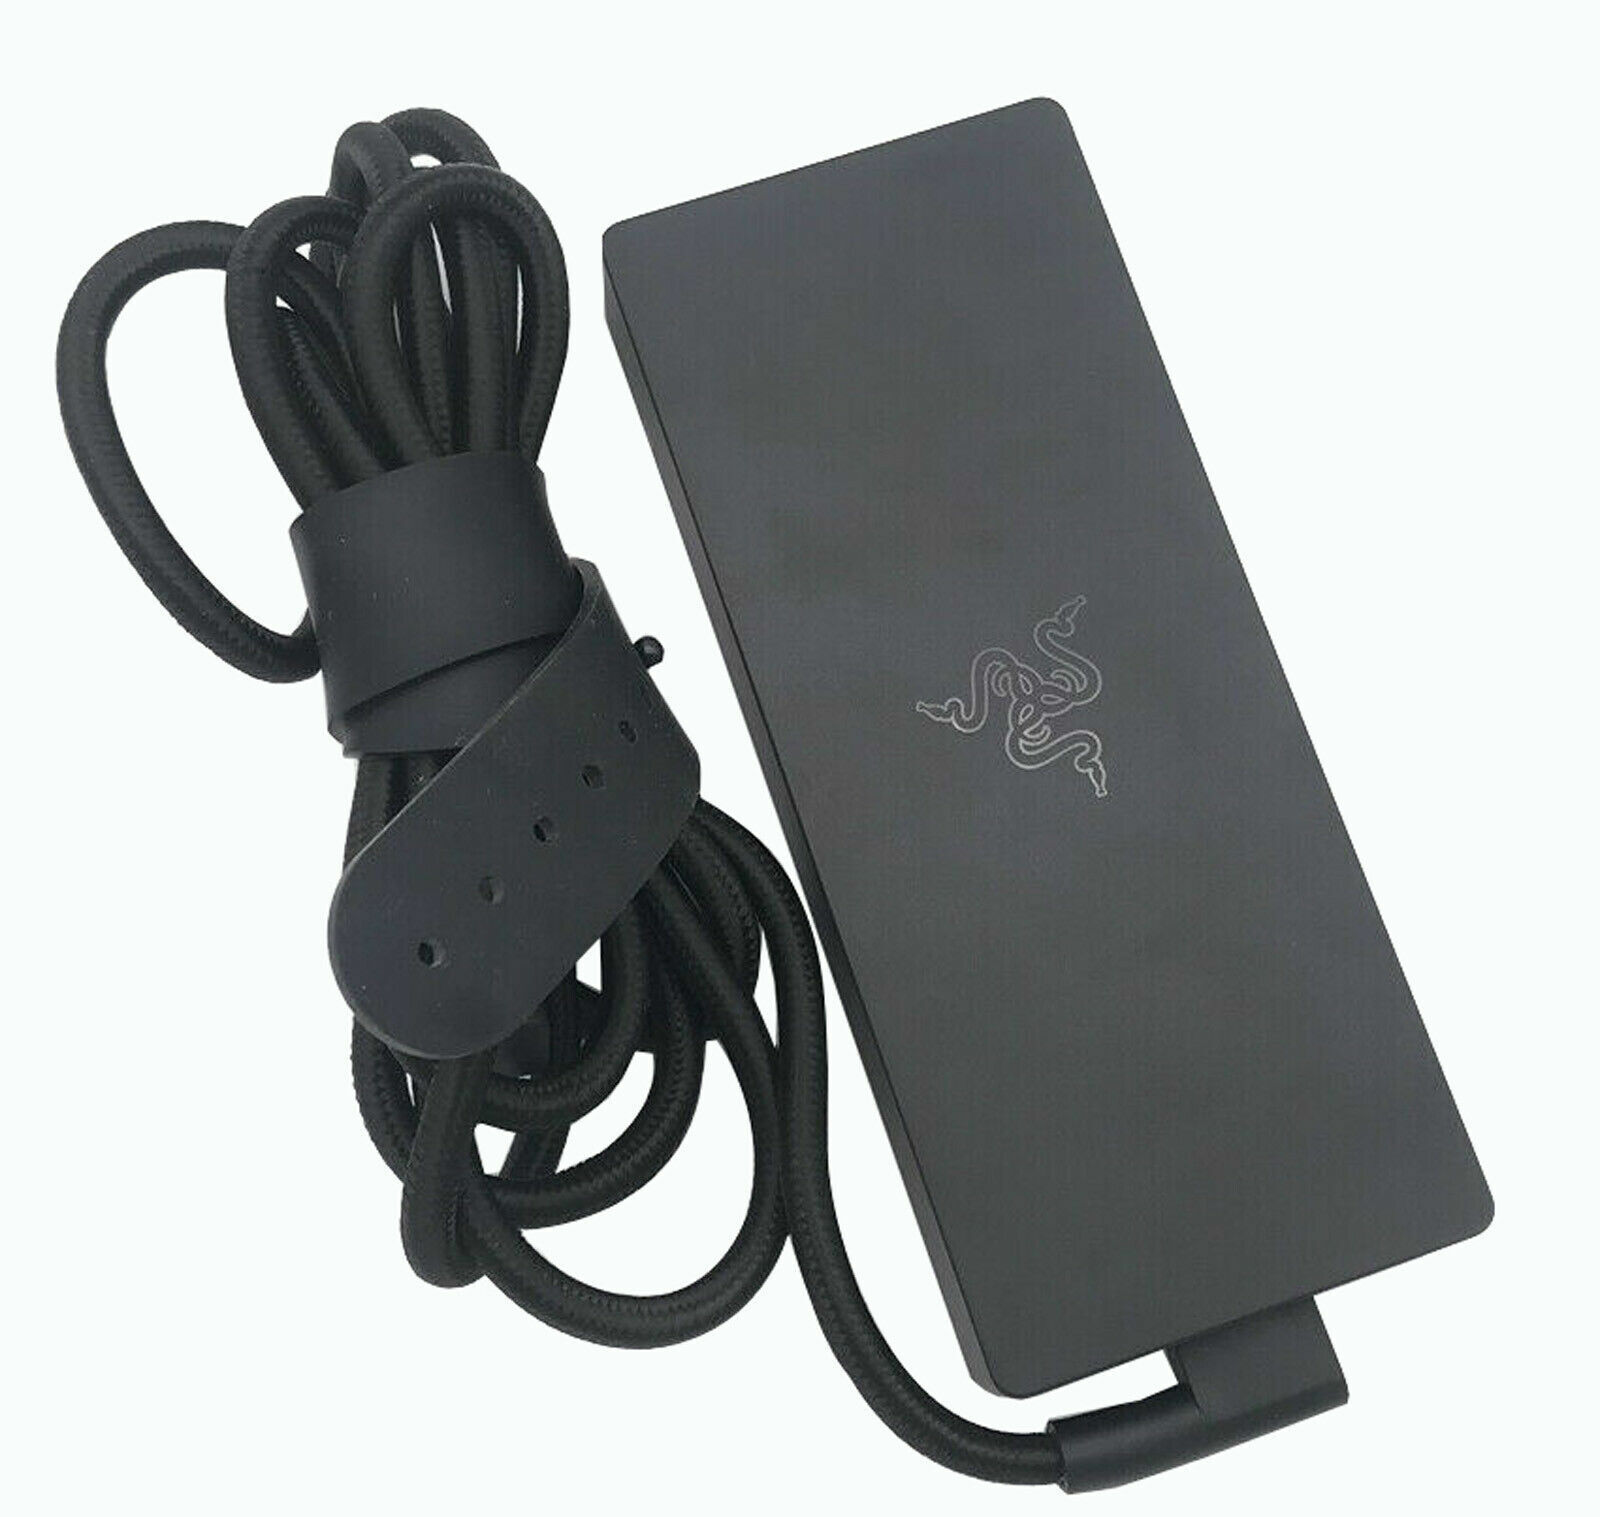 Genuine Razer Blade 15 Laptop Charger 19.5V 11.8A 230W RC30-024801 Power Adapter